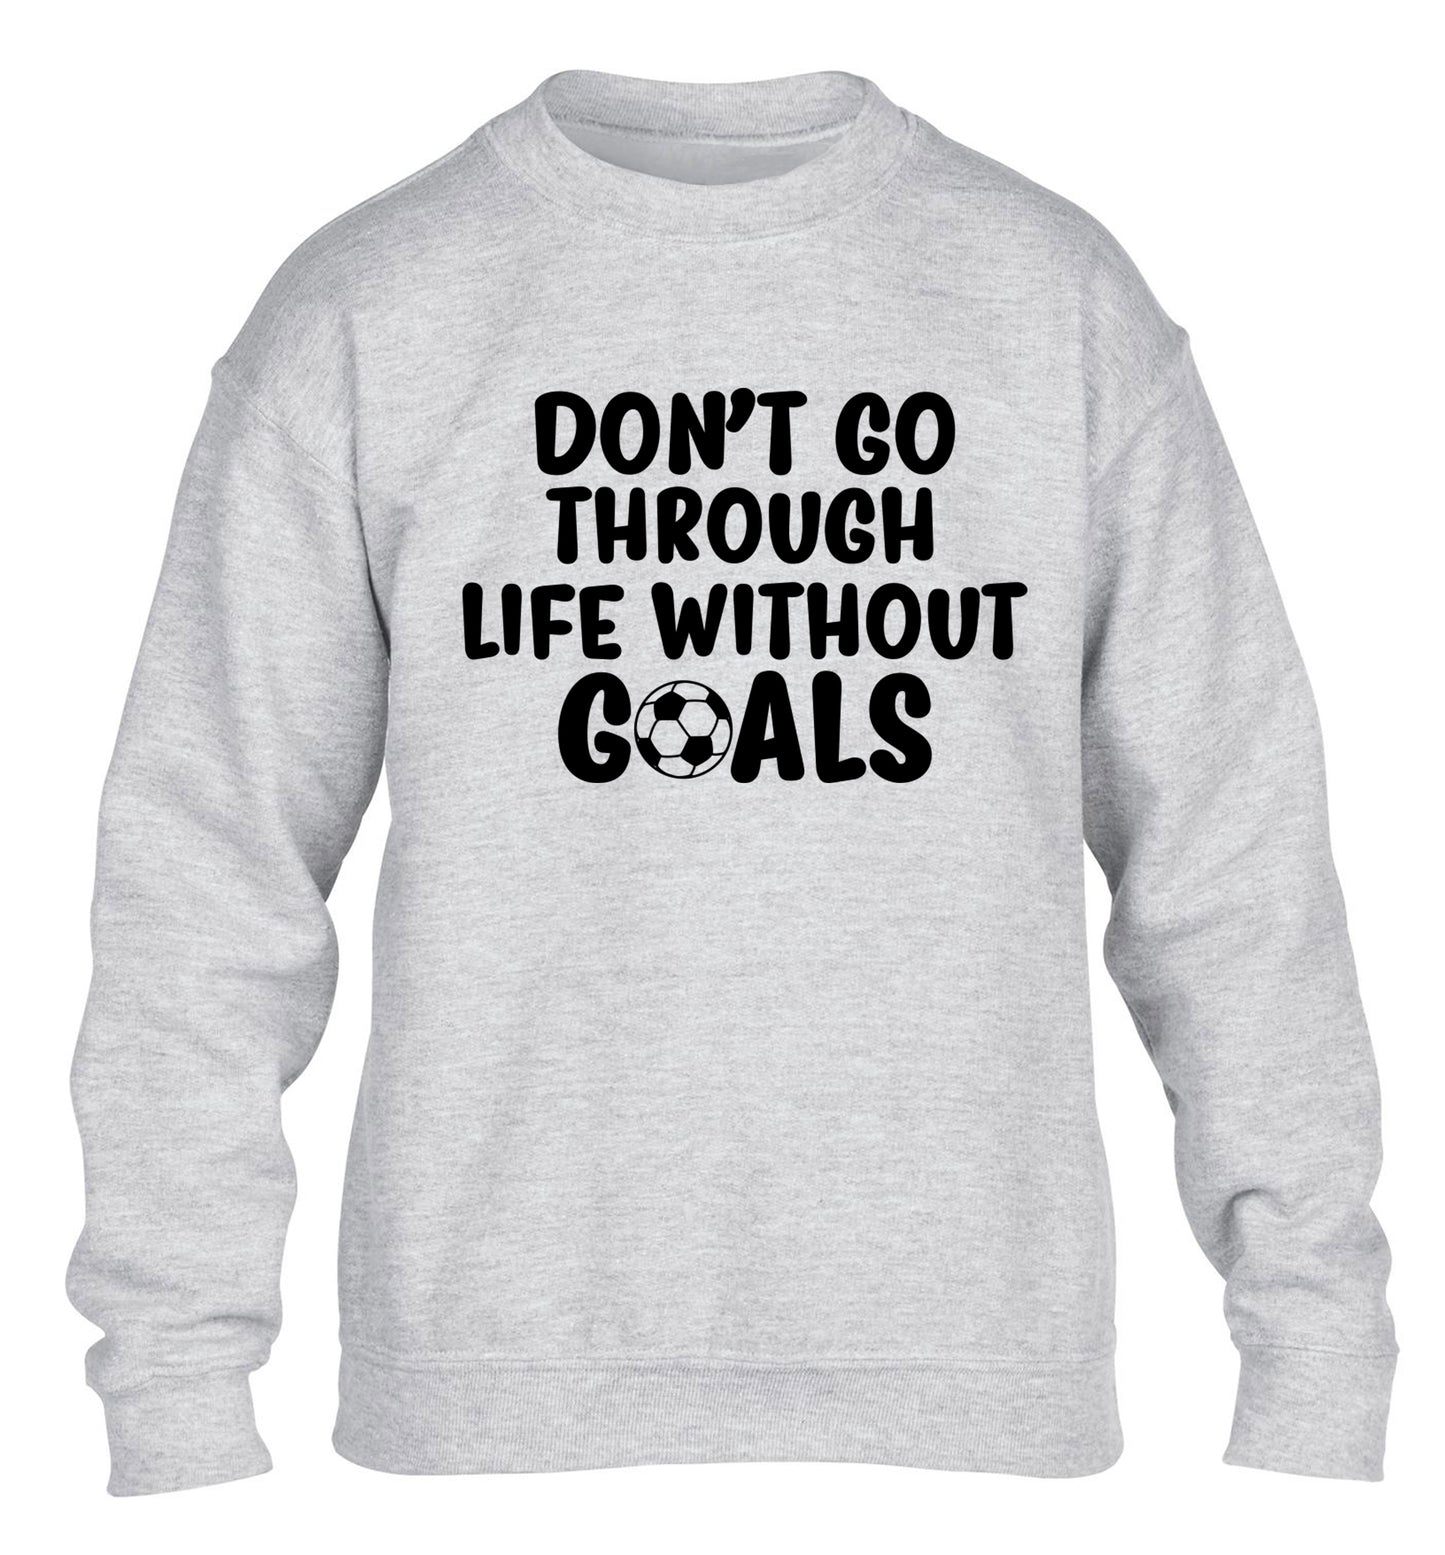 Don't go through life without goals children's grey sweater 12-14 Years